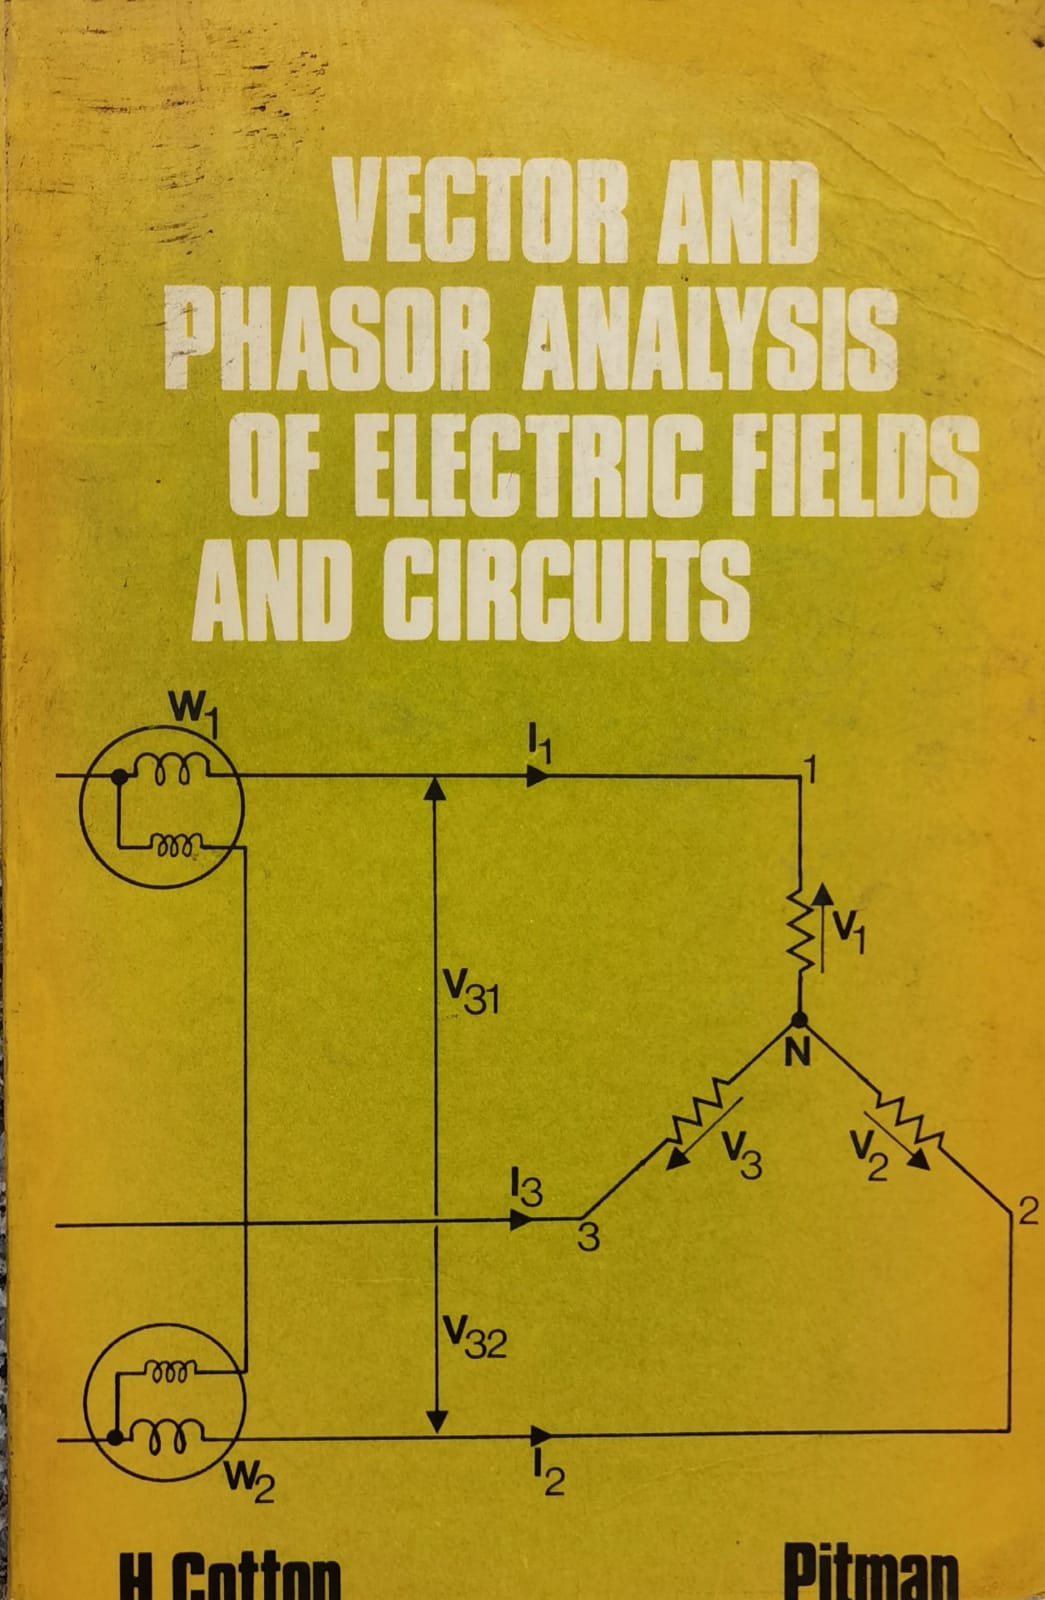 vector and phasor analysis of electric fields and circuits                                           h. cotton                                                                                           